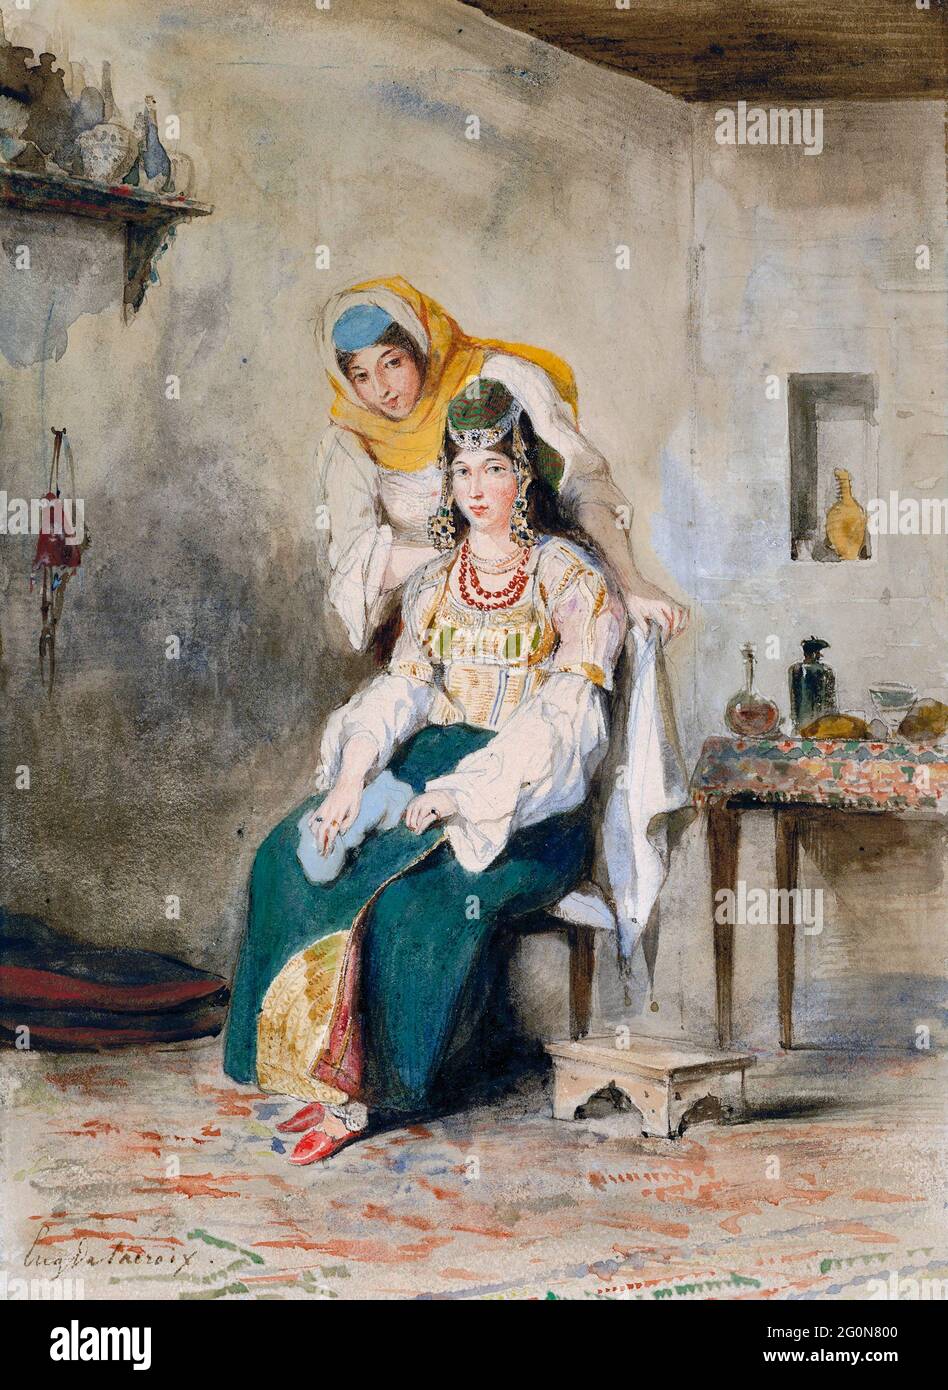 Saada, the Wife of Abraham Ben-Chimol, and Préciada, One of Their Daughters by Eugène Delacroix (1798-163), watercolor over graphite on wove paper, 1832 Stock Photo